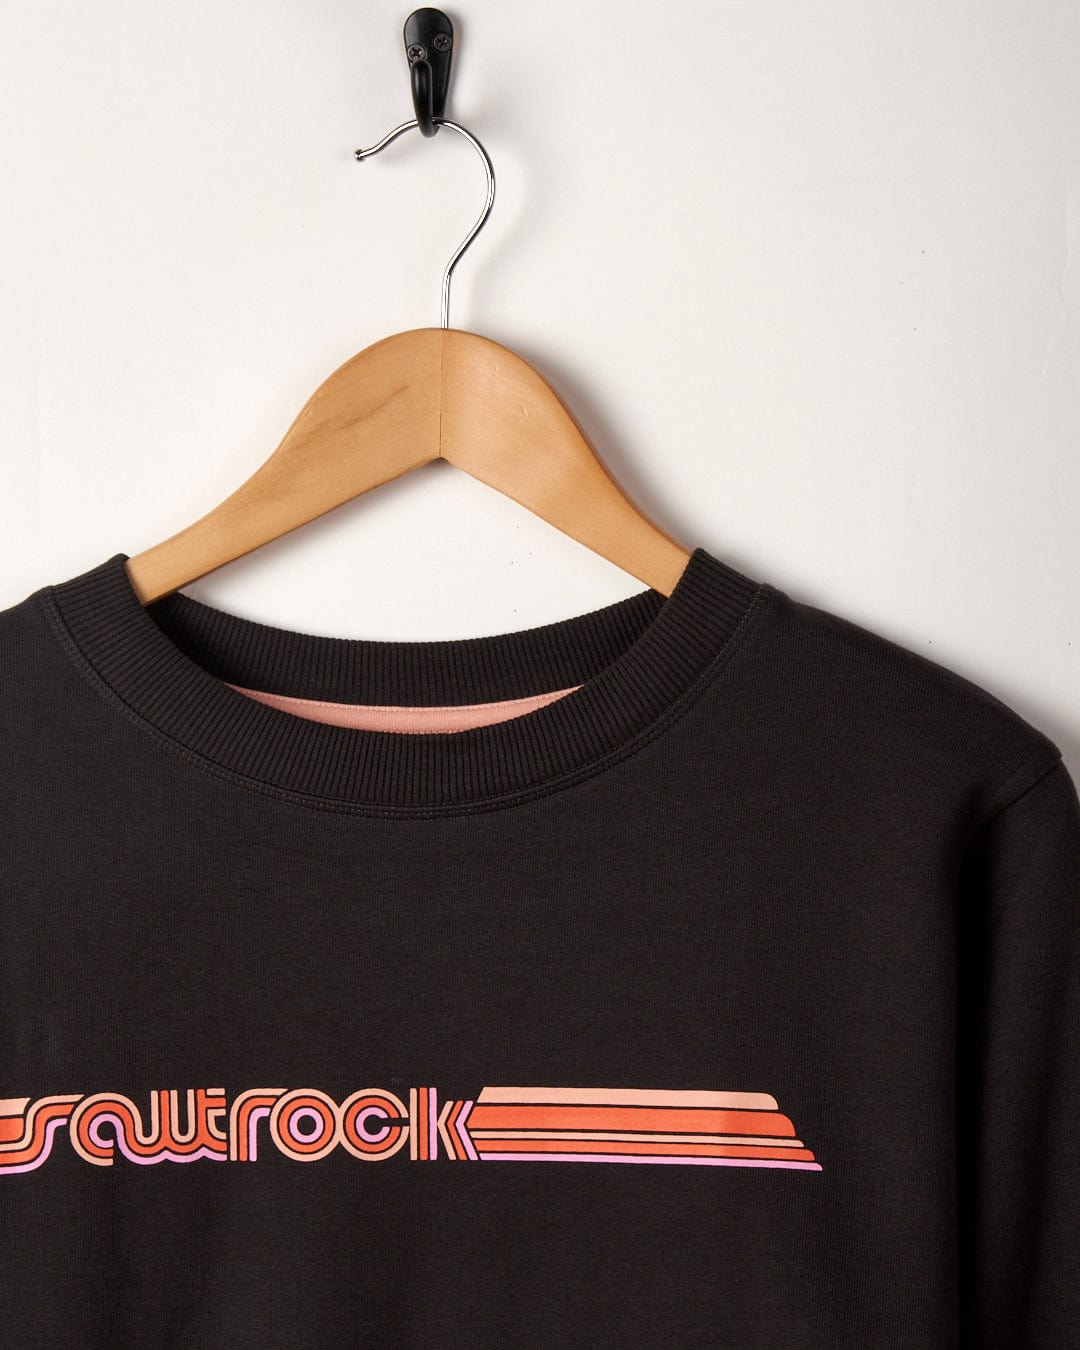 Black crew neck sweatshirt with "Retro Ribbon Tape" text displayed on a wooden hanger against a white background.